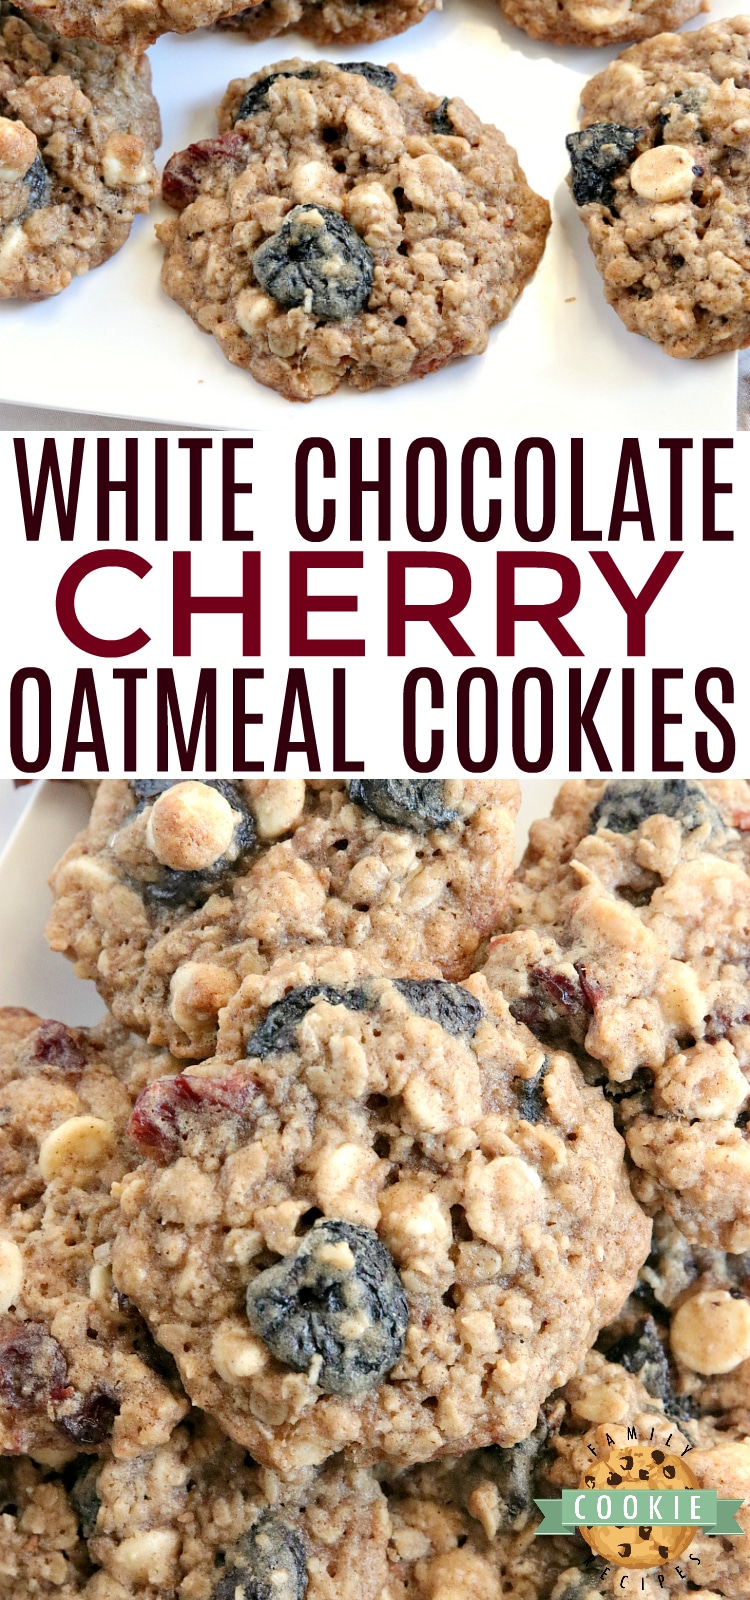 White Chocolate Cherry Oatmeal Cookies are made by adding white chocolate chips and dried cherries to the most amazing oatmeal cookie recipe ever! These cookies are soft and chewy and the flavors are incredible.